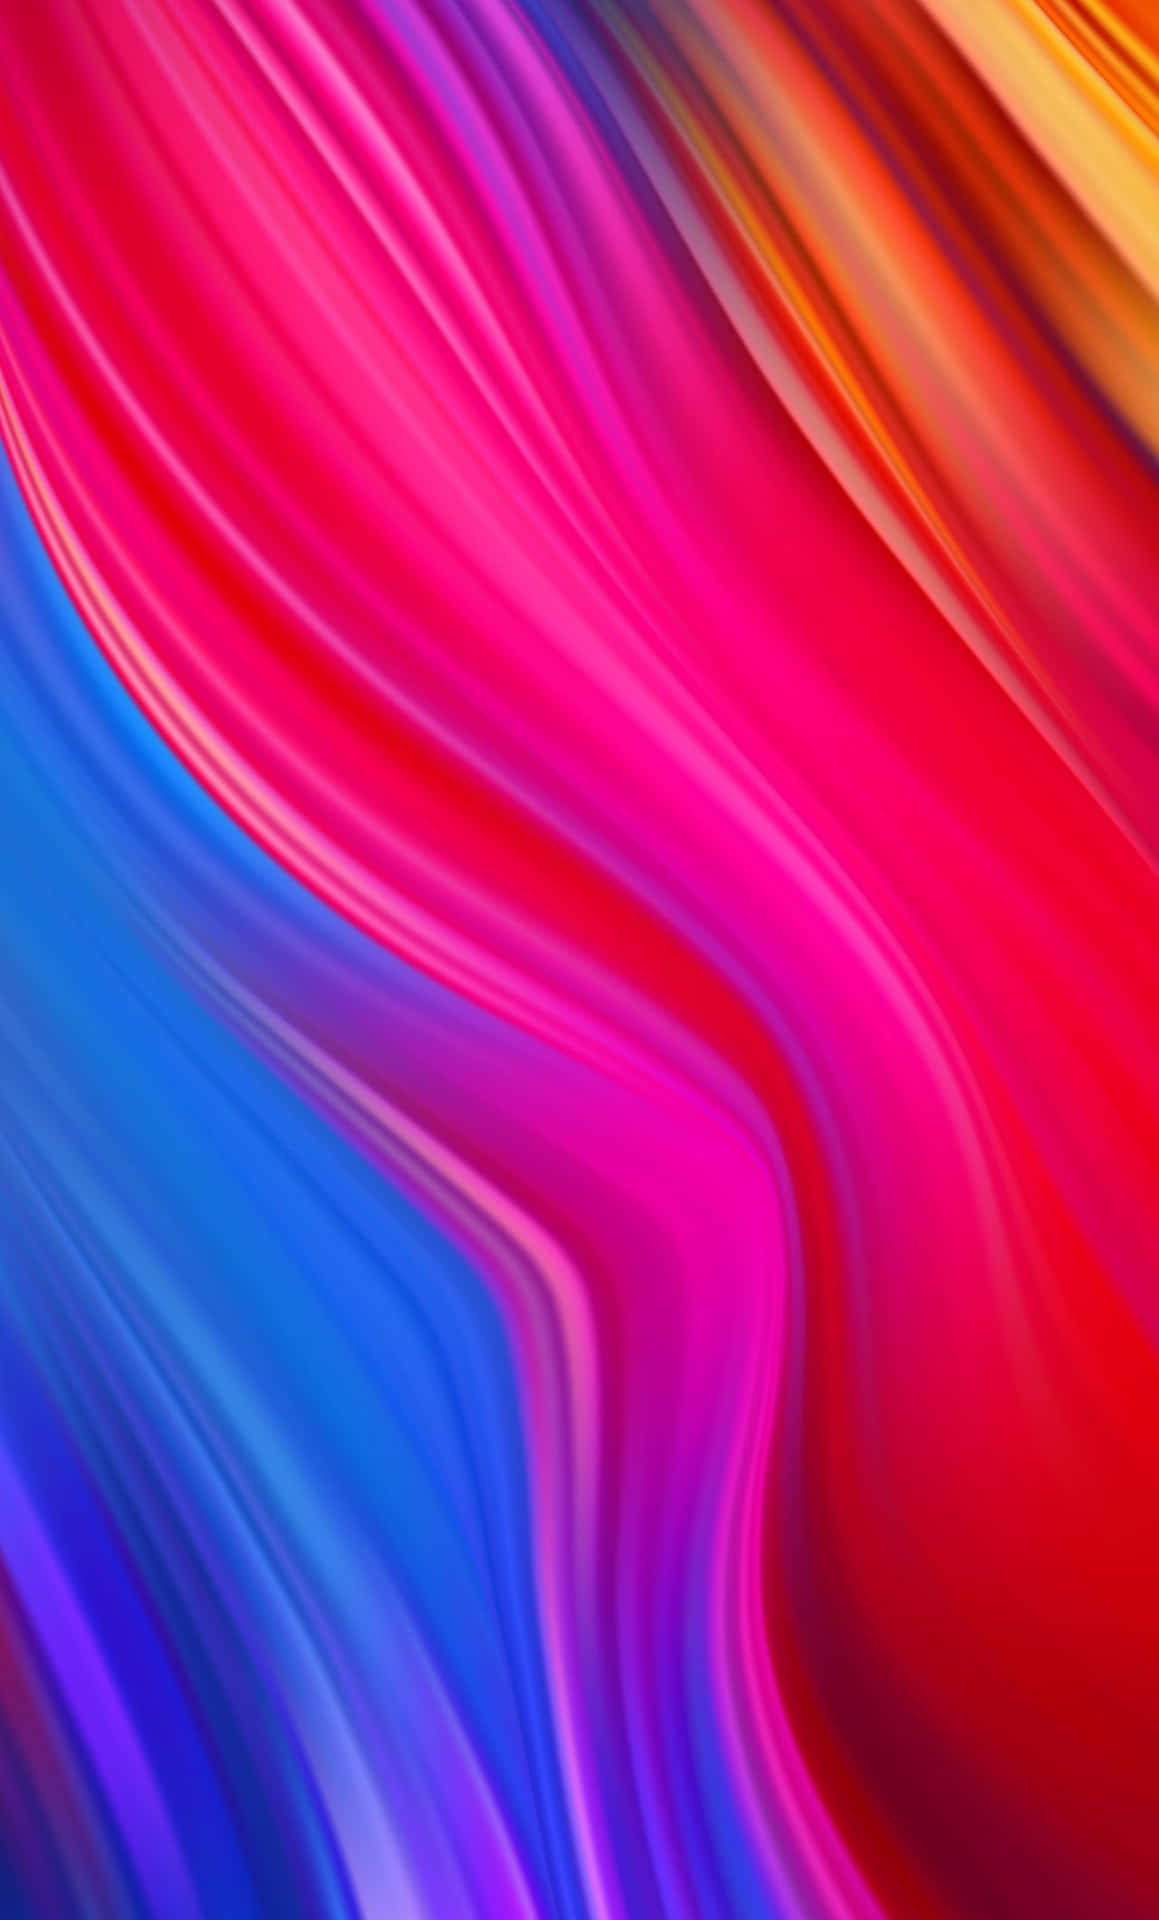 Download Embrace The Abstraction Wallpaper | Wallpapers.com